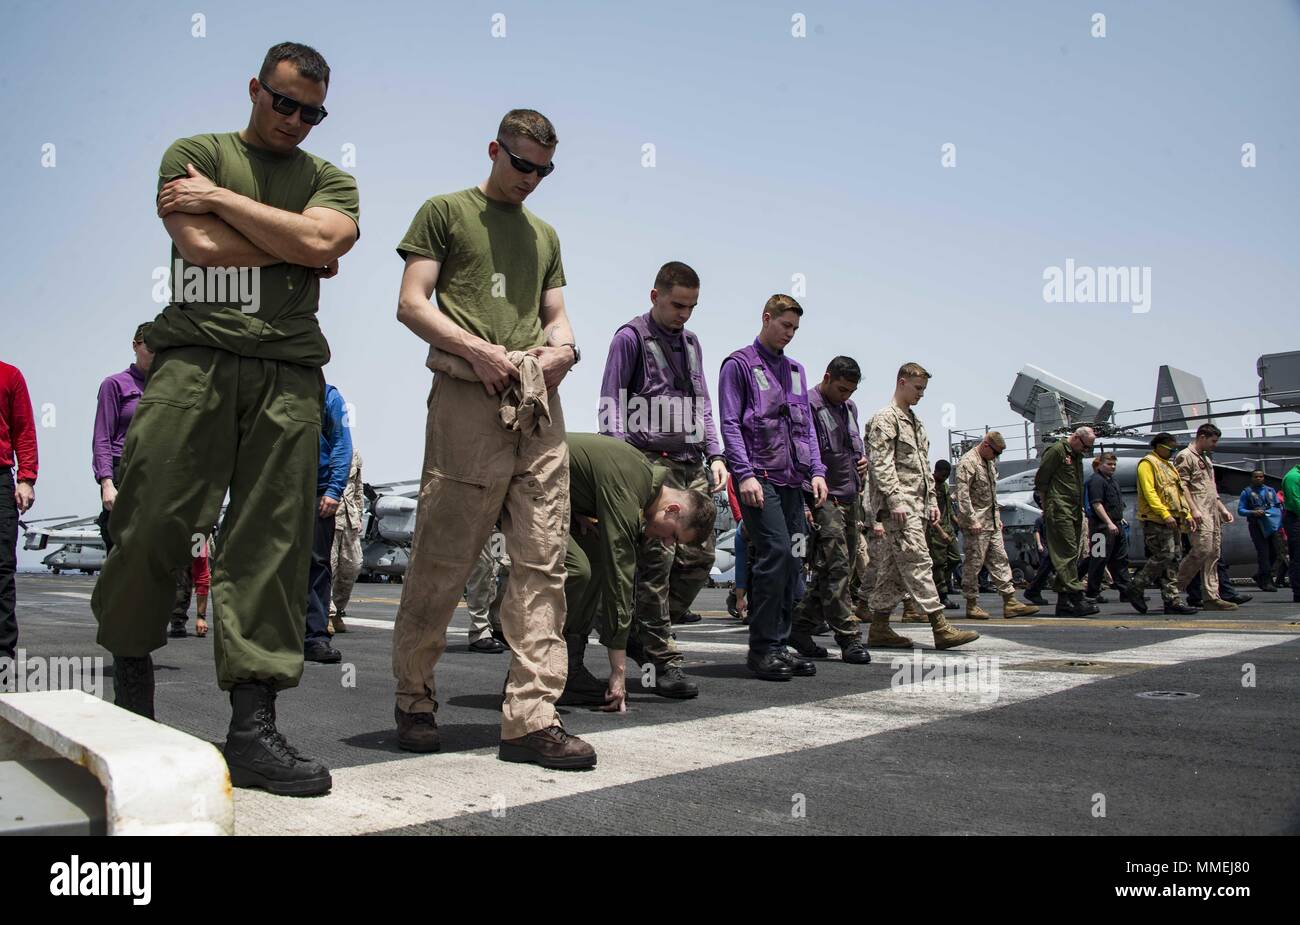 180510-N-ZK016-0026 U.S. 5TH FLEET AREA OF OPERATIONS (May 10, 2018) Sailors and Marines conduct a foreign object damage walk-down on the flight deck of the Wasp-class amphibious assault ship USS Iwo Jima (LHD 7), May 10, 2018, May 10, 2018. Iwo Jima, homeported in Mayport, Fla. is on deployment to the U.S. 5th Fleet area of operations in support of maritime security operations to reassure allies and partners, and preserve the freedom of navigation and the free flow of commerce in the region. (U.S. Navy photo by Mass Communication Specialist 3rd Class Joe J. Cardona Gonzalez /Released). () Stock Photo